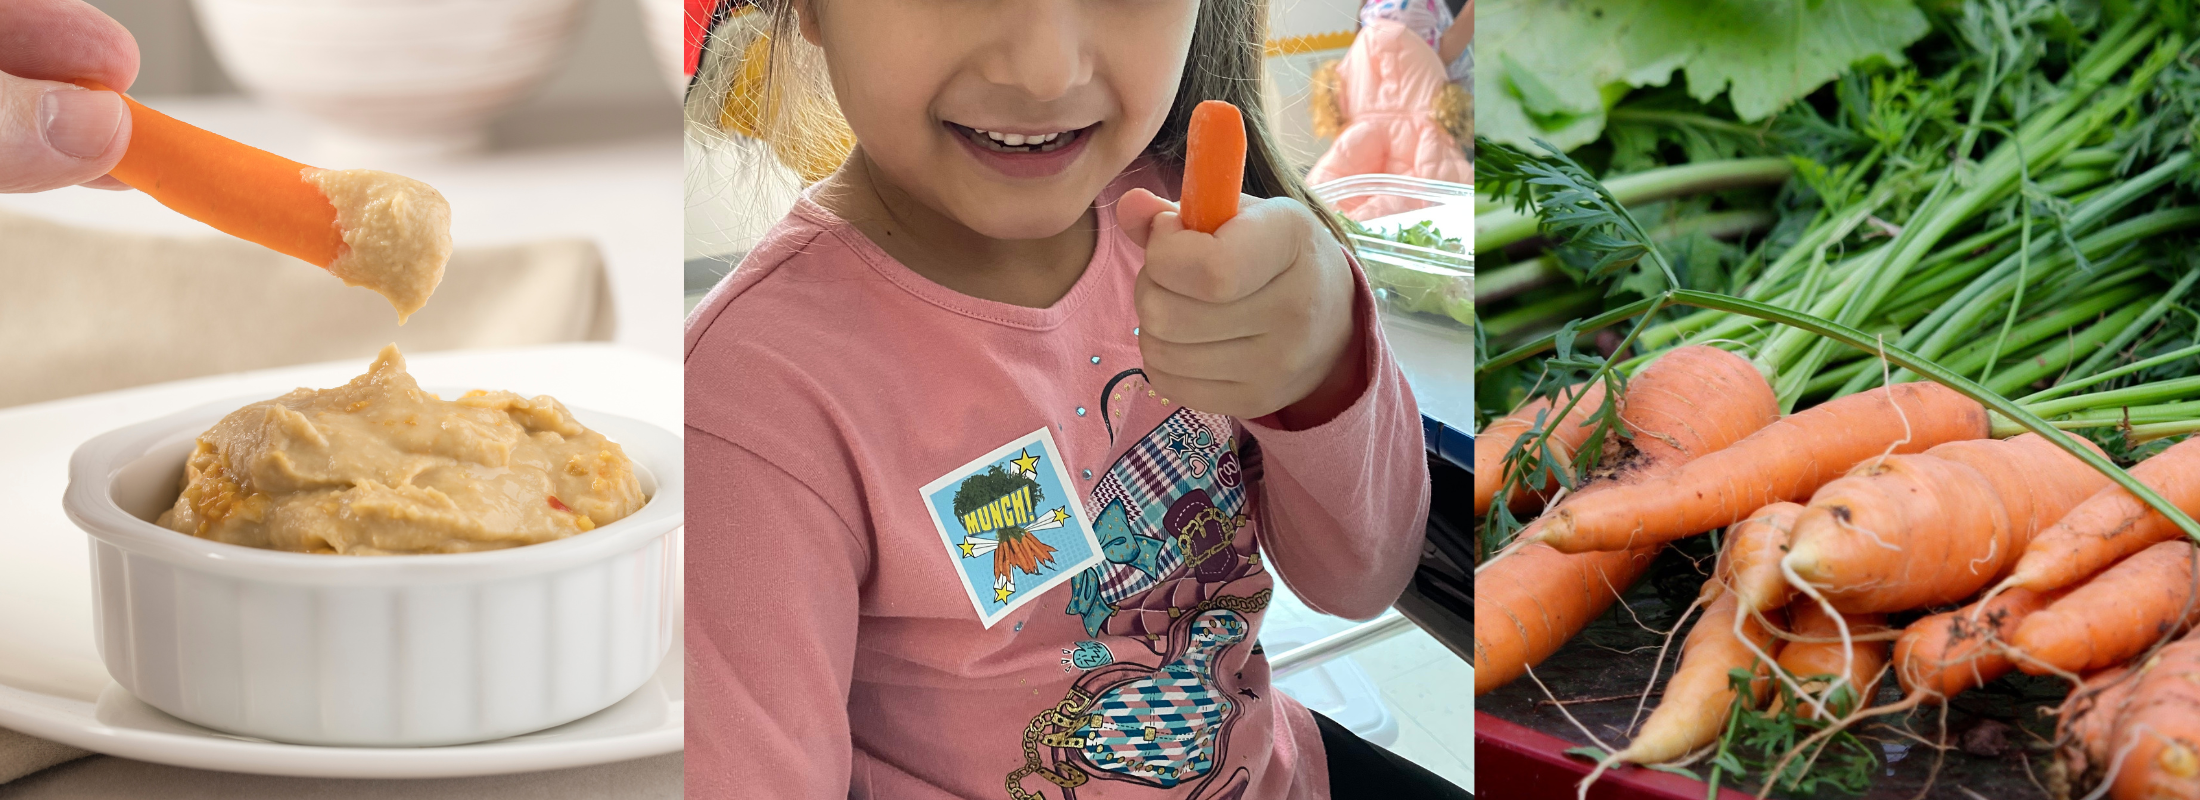 images of peppers, green beans, girl hold a carrot and a bunch of carrots